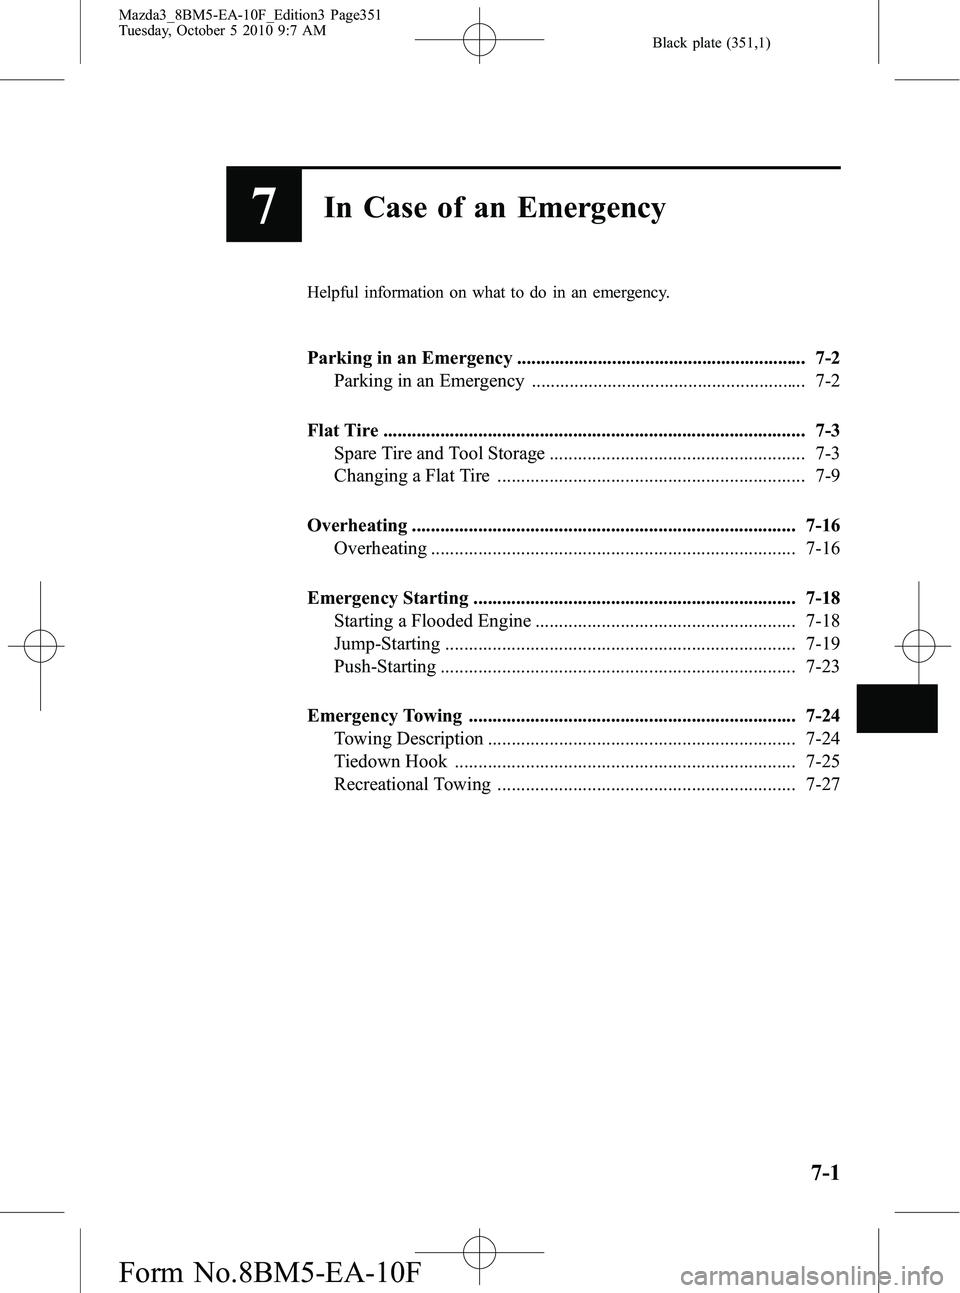 MAZDA MODEL 3 5-DOOR 2011  Owners Manual Black plate (351,1)
7In Case of an Emergency
Helpful information on what to do in an emergency.
Parking in an Emergency ............................................................. 7-2Parking in an E